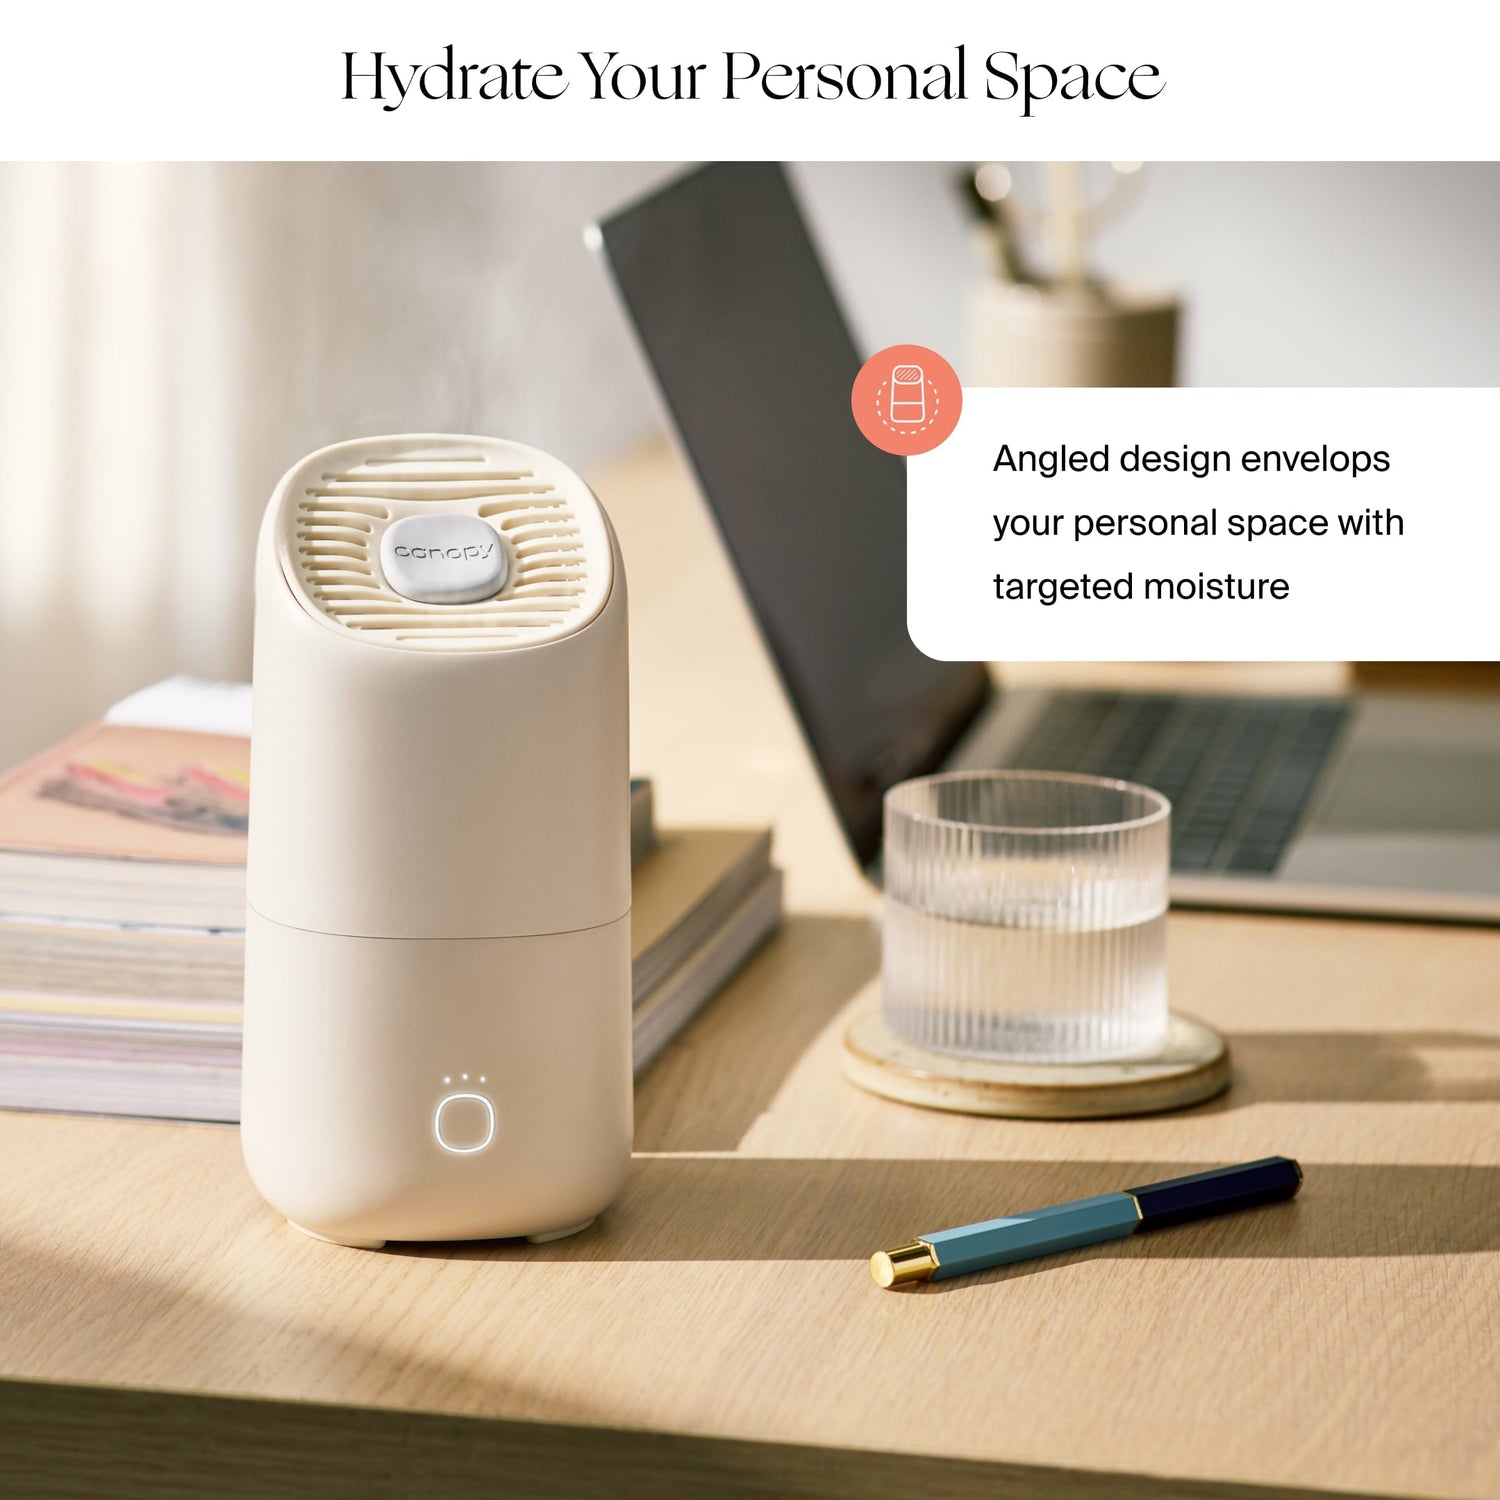 Portable Humidifier | Lifestyle, Hydrate Your Personal Space